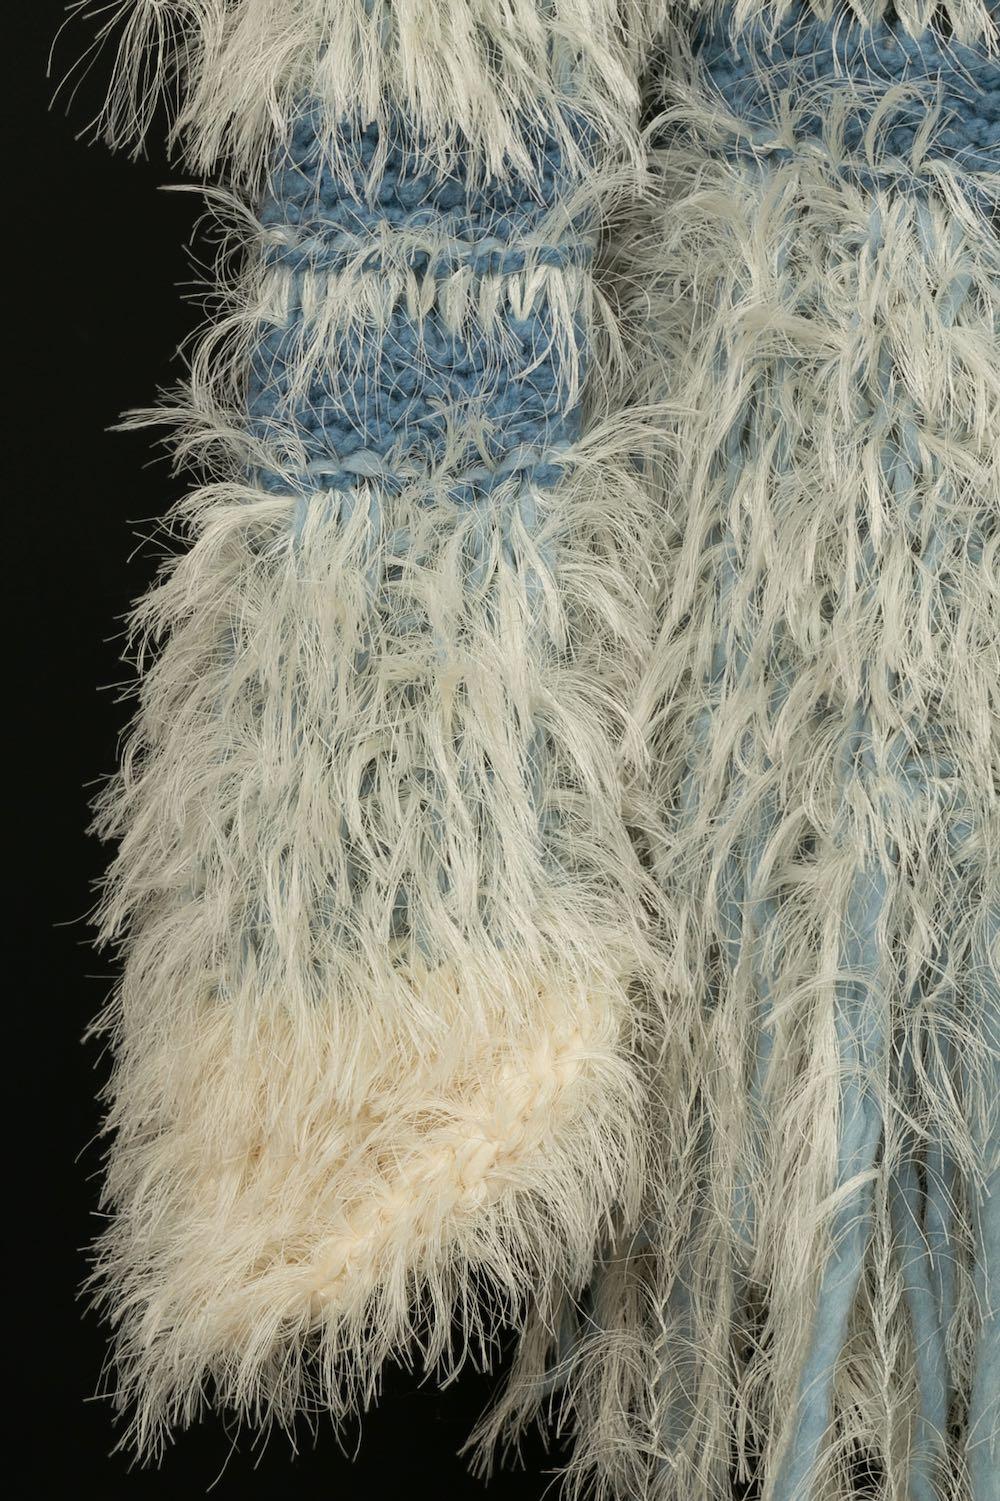 John Galliano Coat with Wool Mix in Blue Tones, Fall 2005 For Sale 4